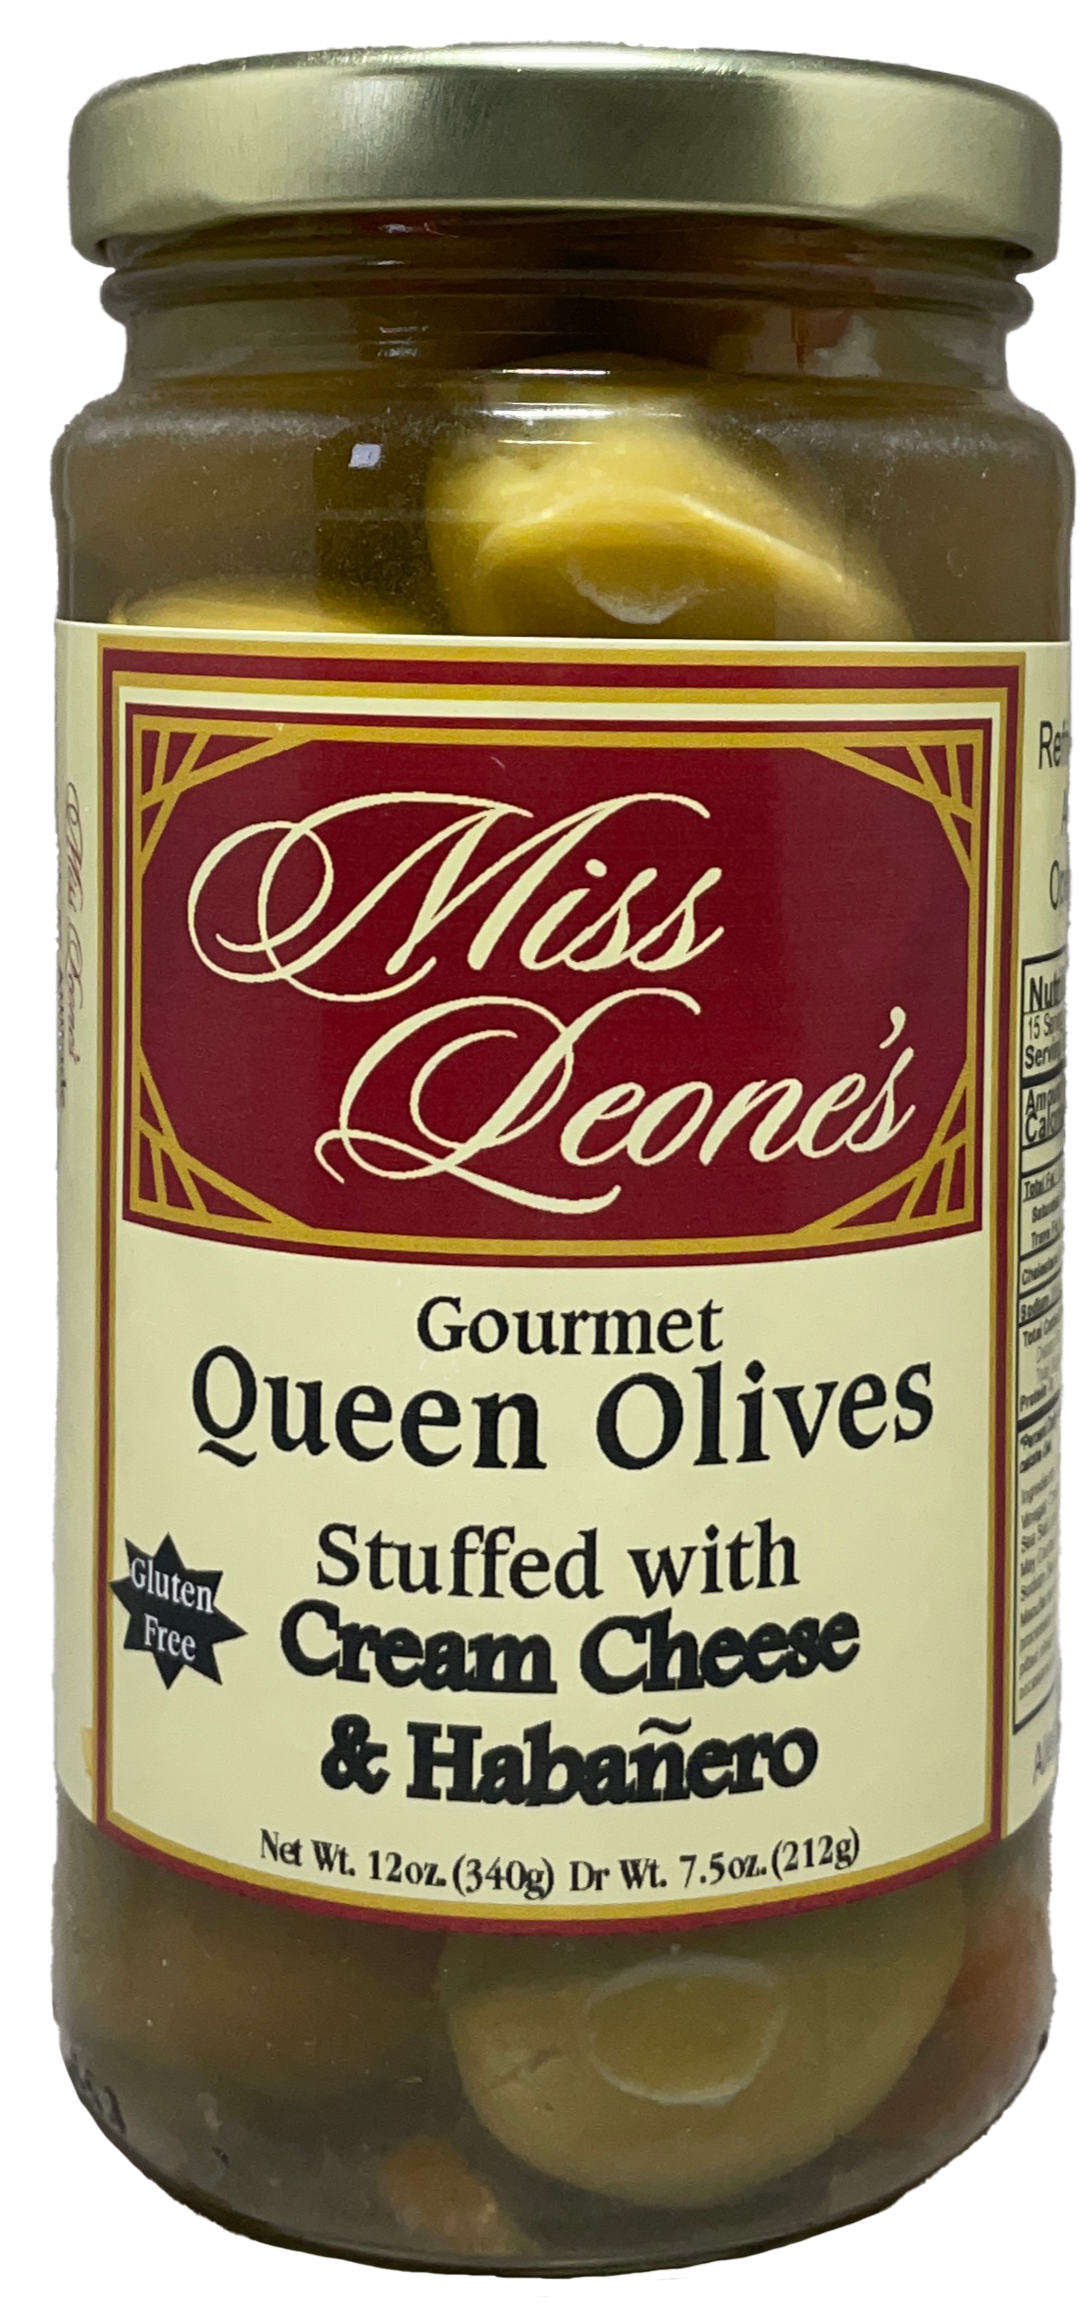 Cream Cheese & Habanero Double Stuffed Queen Olives *NEW LOWER PRICE*